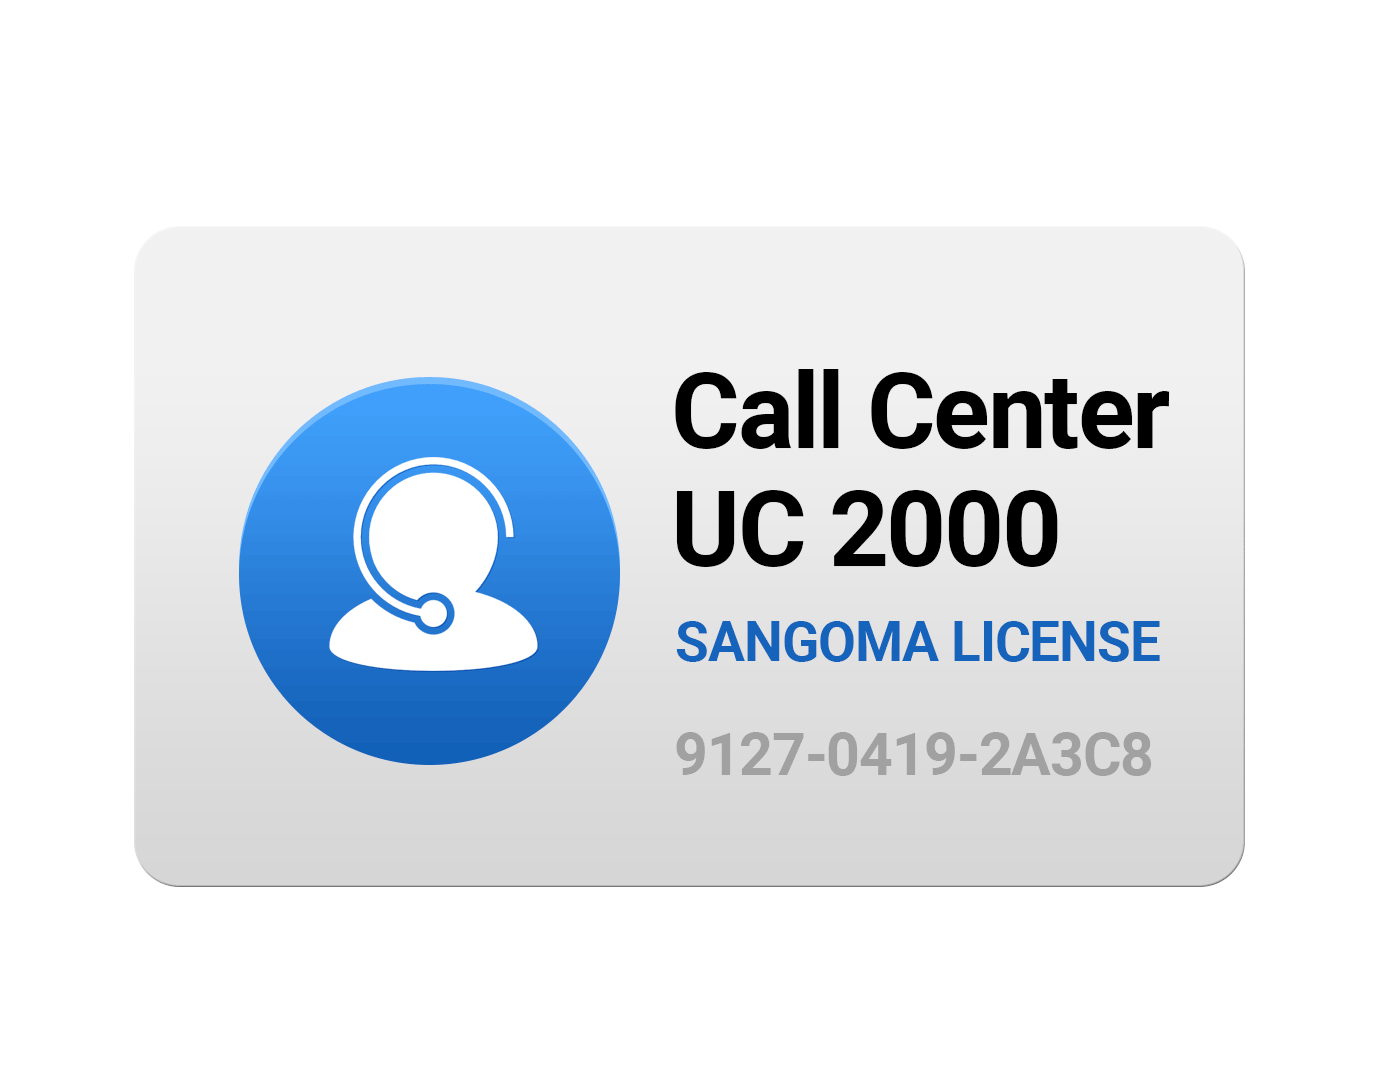 Call Center Features License for UC 2000